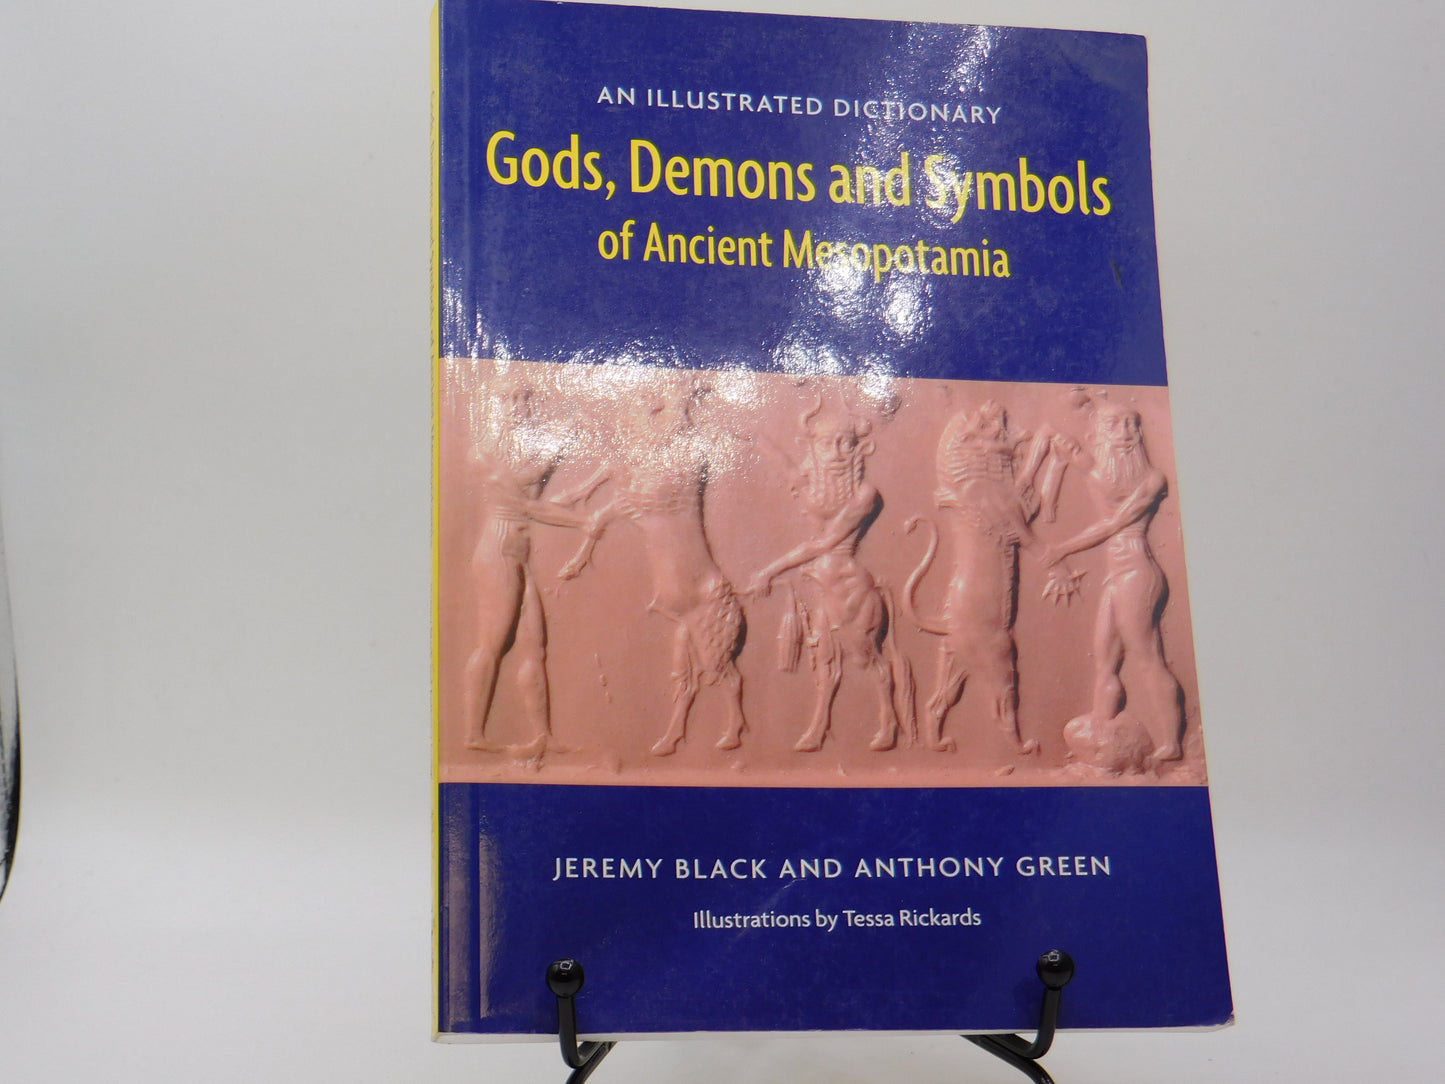 Gods, Demons, and Symbols of Ancient Mesopotamia by Jeremy Black and Anthony Green